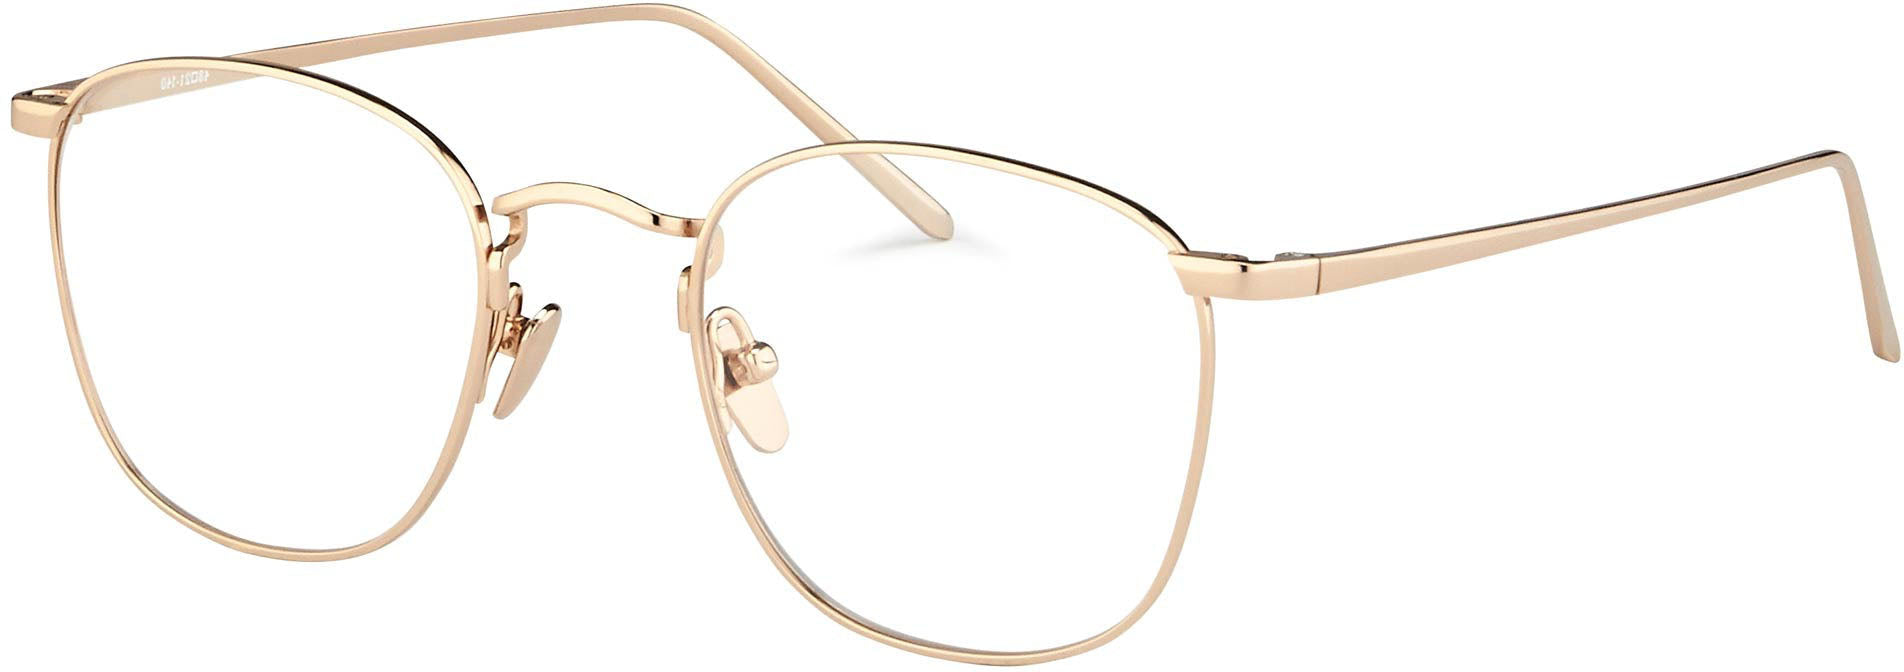 Square Optical Frame in Rose Gold (C8)